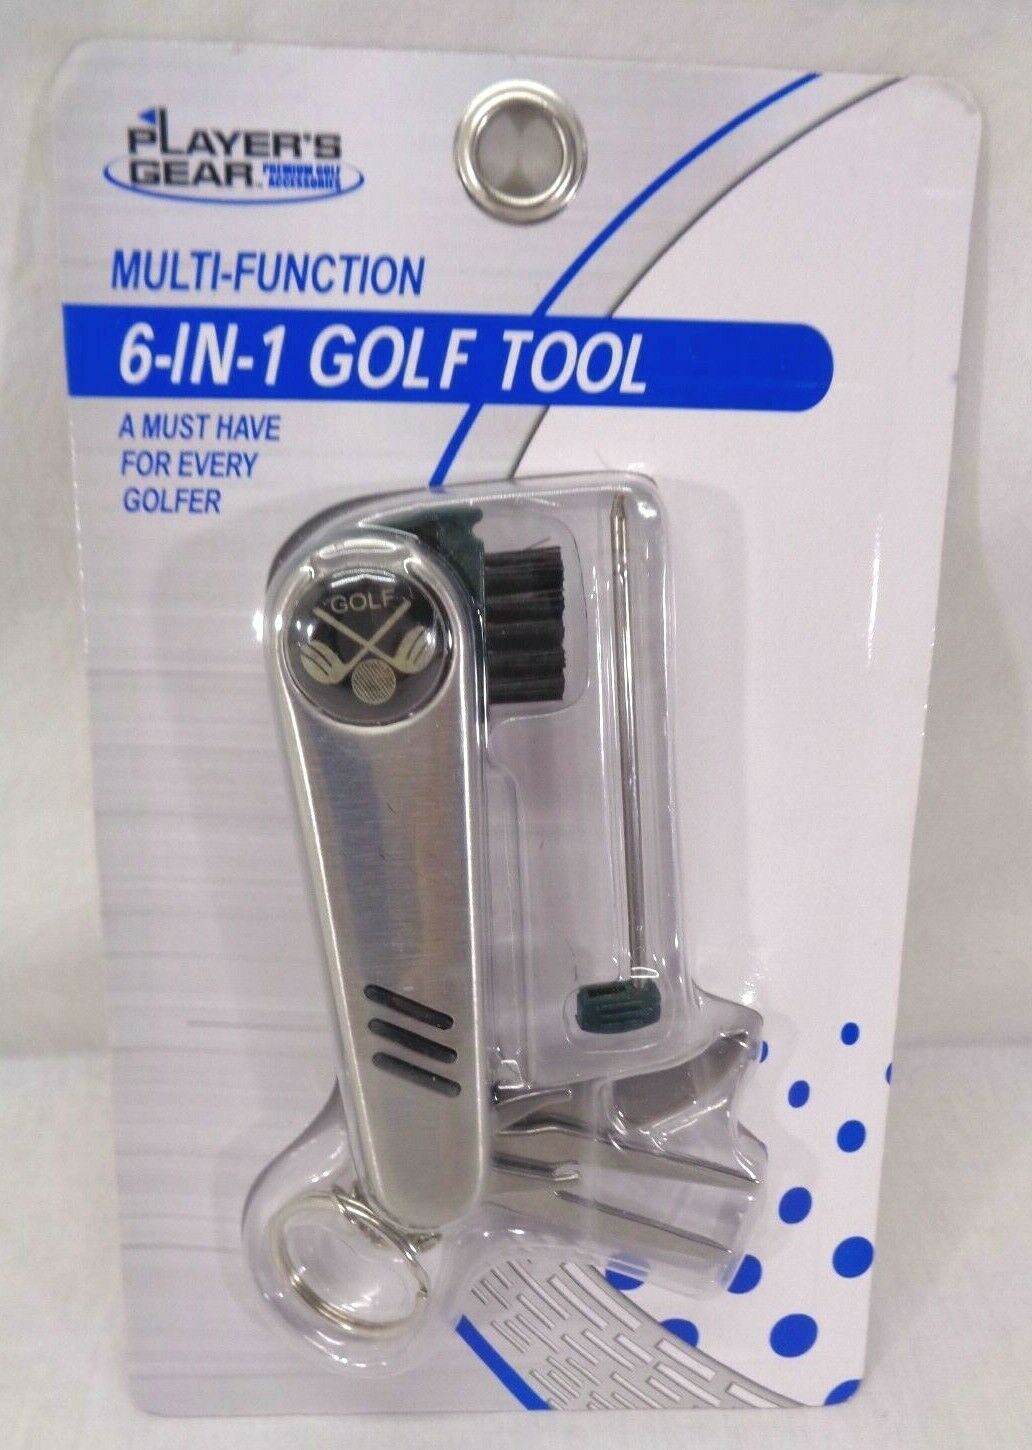 Player's Gear 6 In 1 Golf Multi Function All In One Golfers Multi-function Tool